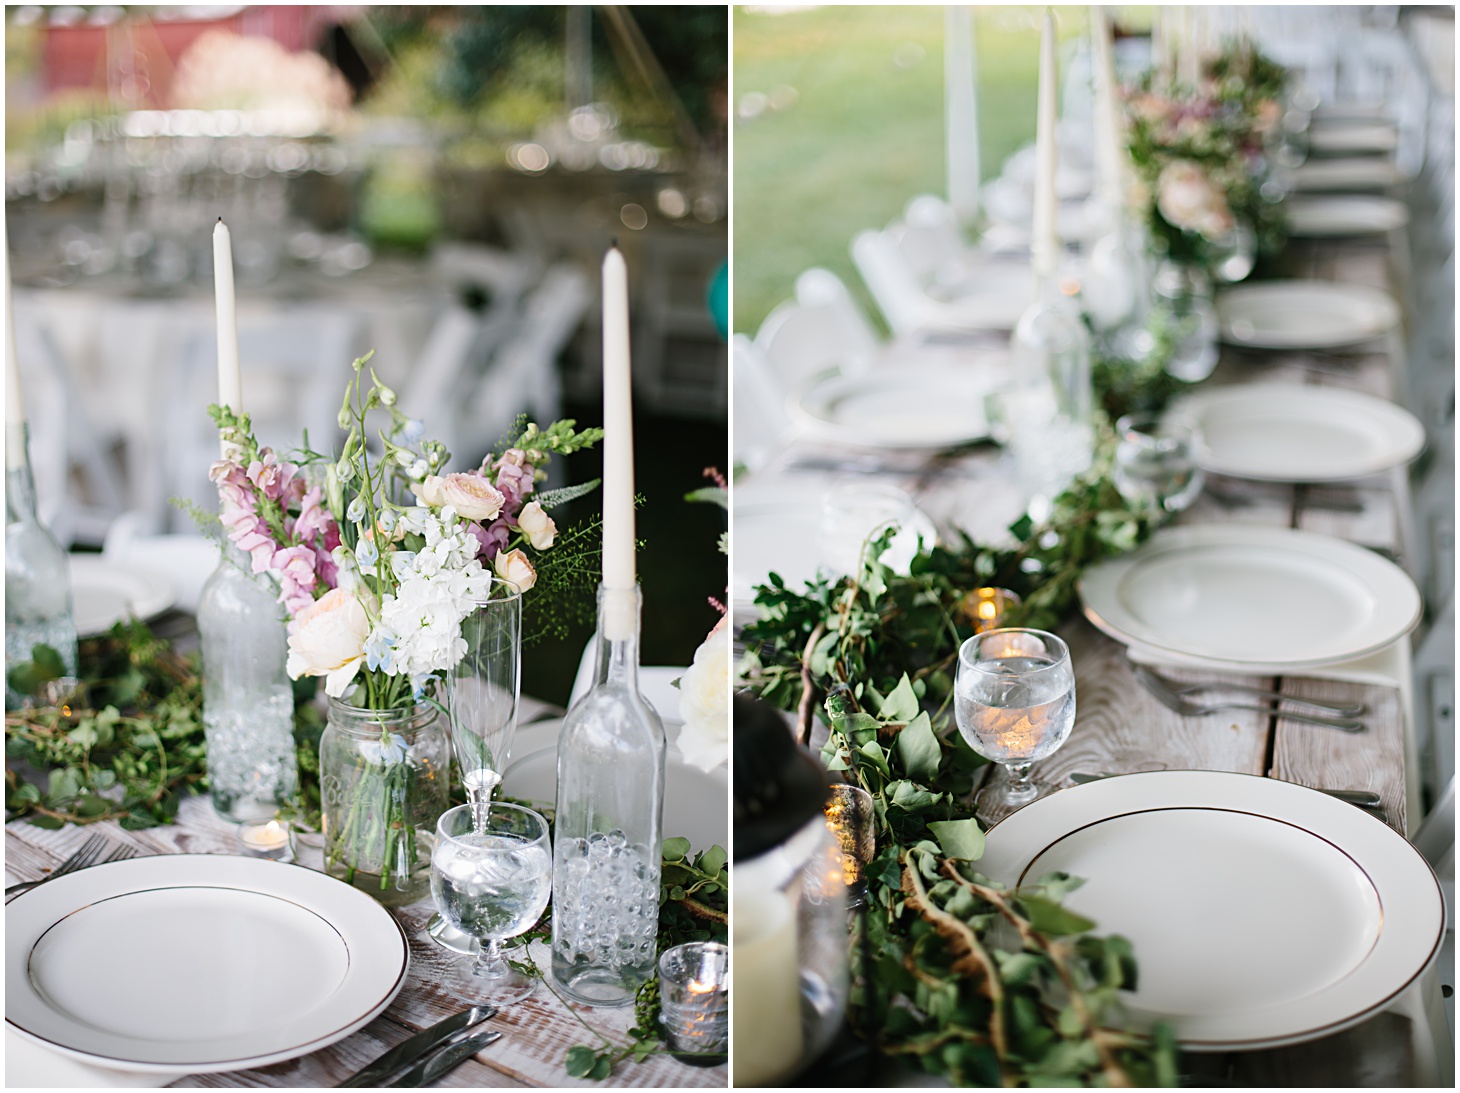 Rustic Floral Wedding at Rocklands Farm & Winery by Sarah Bradshaw Photography_0038